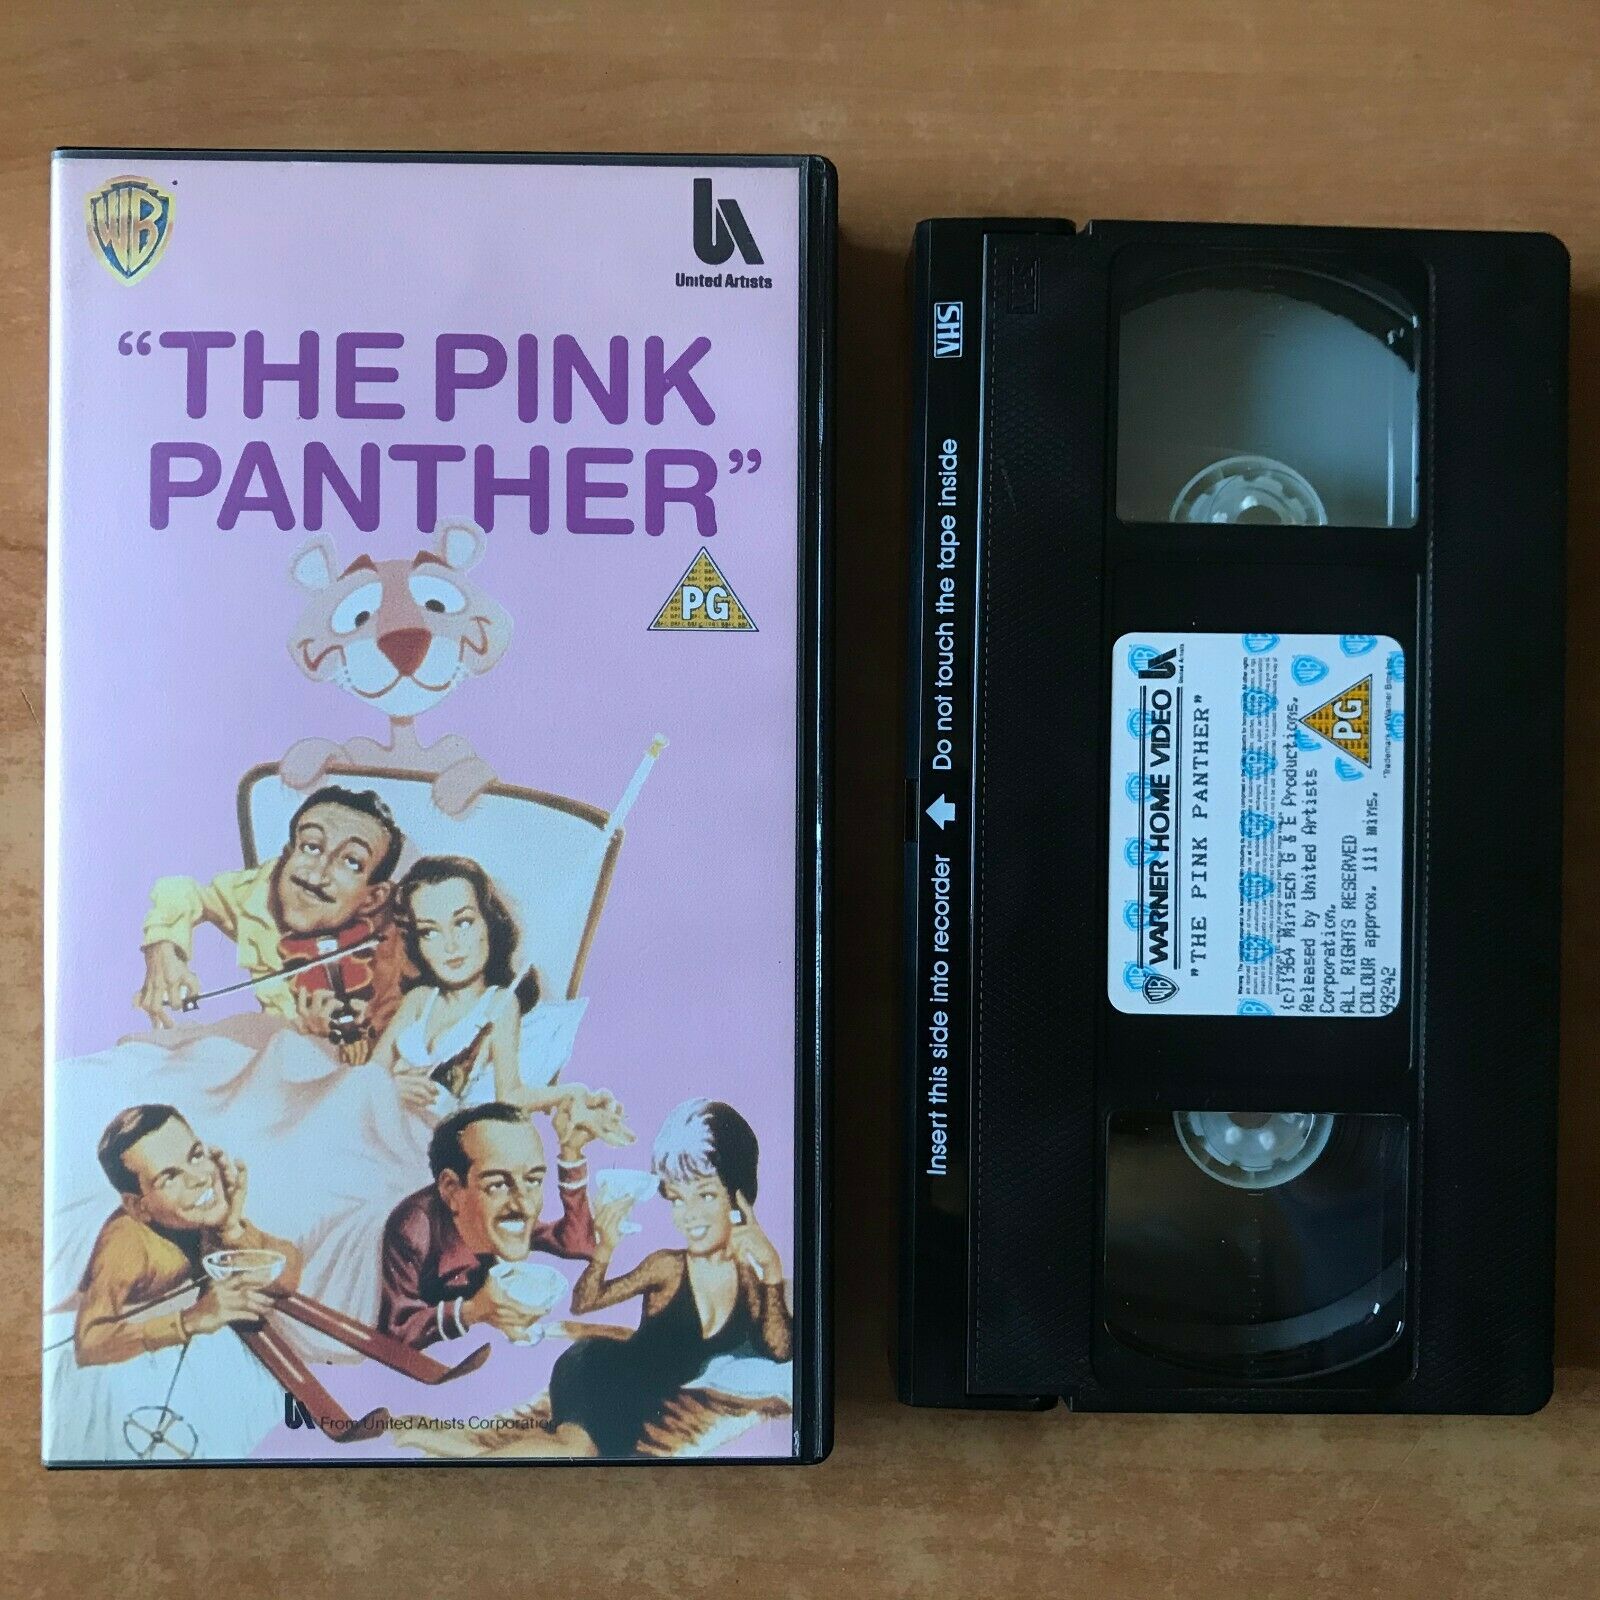 The Pink Panther [Blake Edwards] Comedy - Peter Sellers/Claudia Cardinale - VHS-